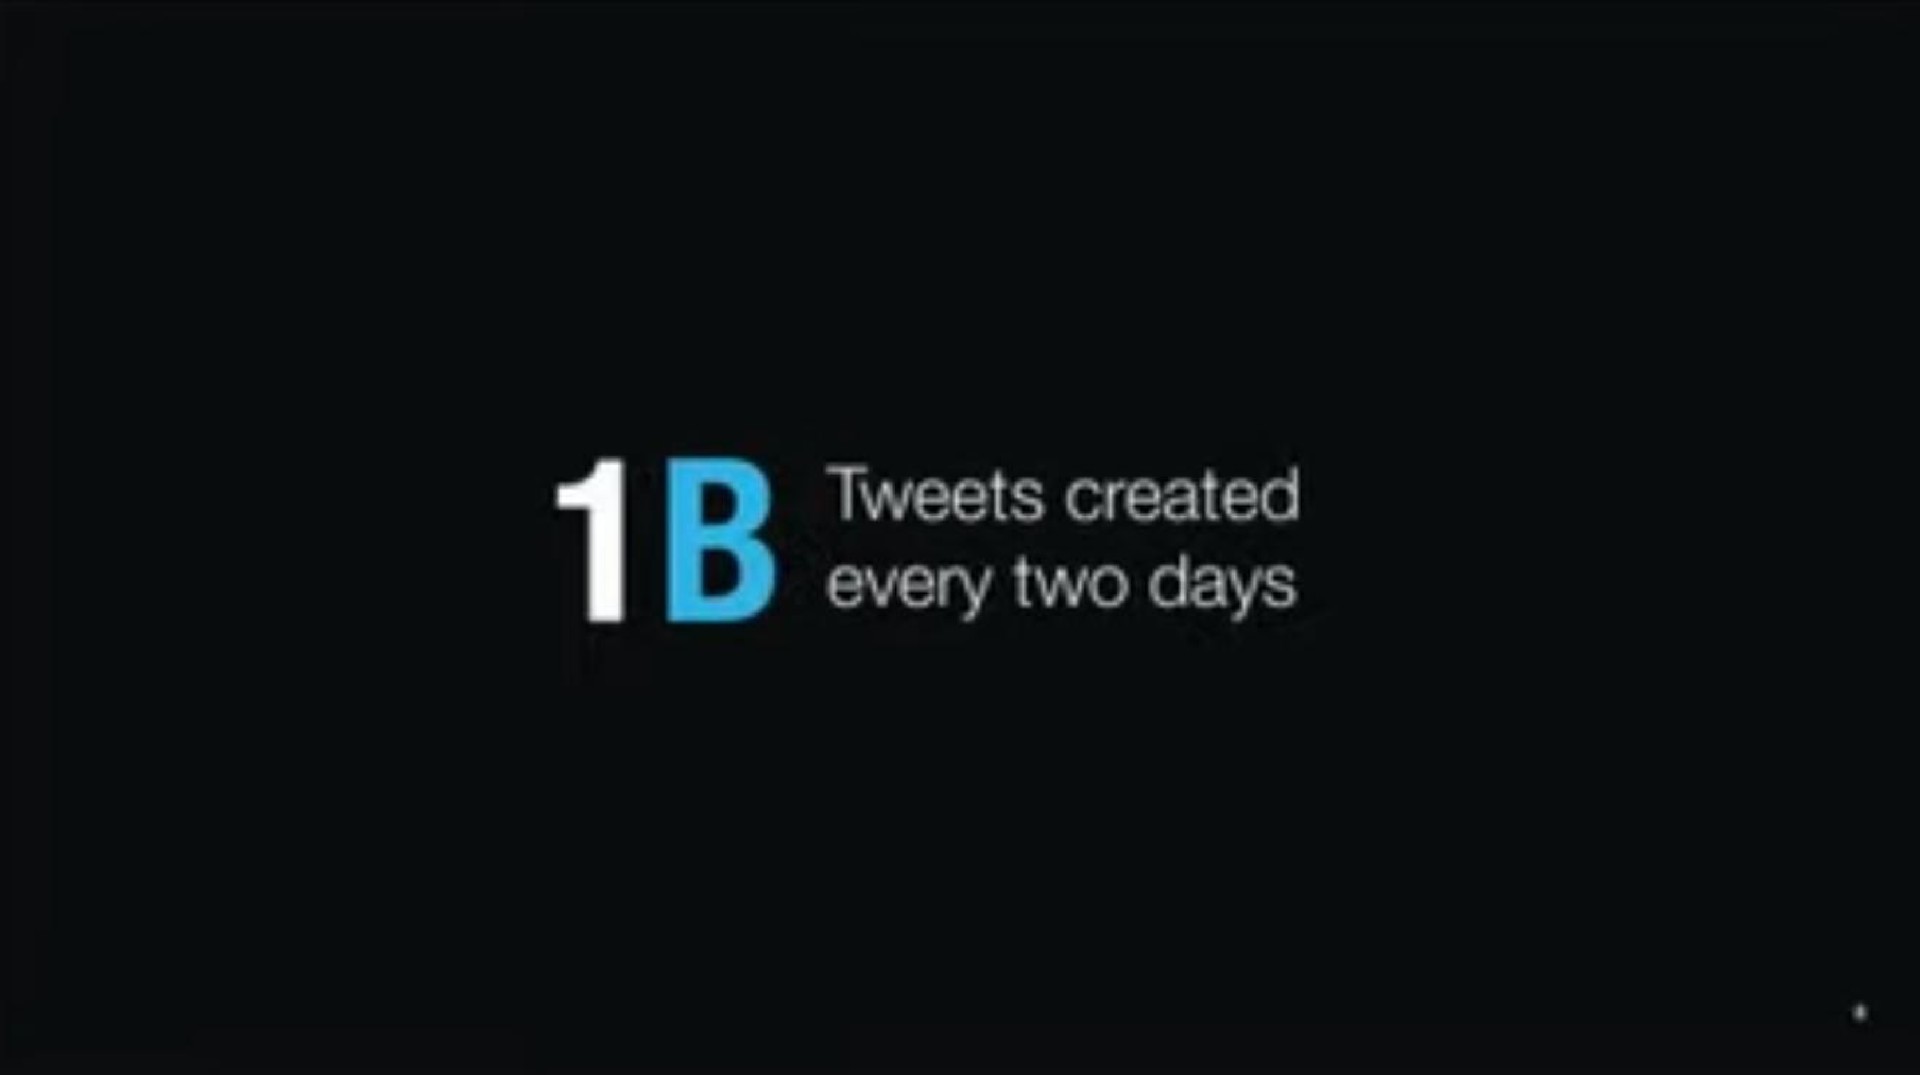 tweets created every two days | Twitter